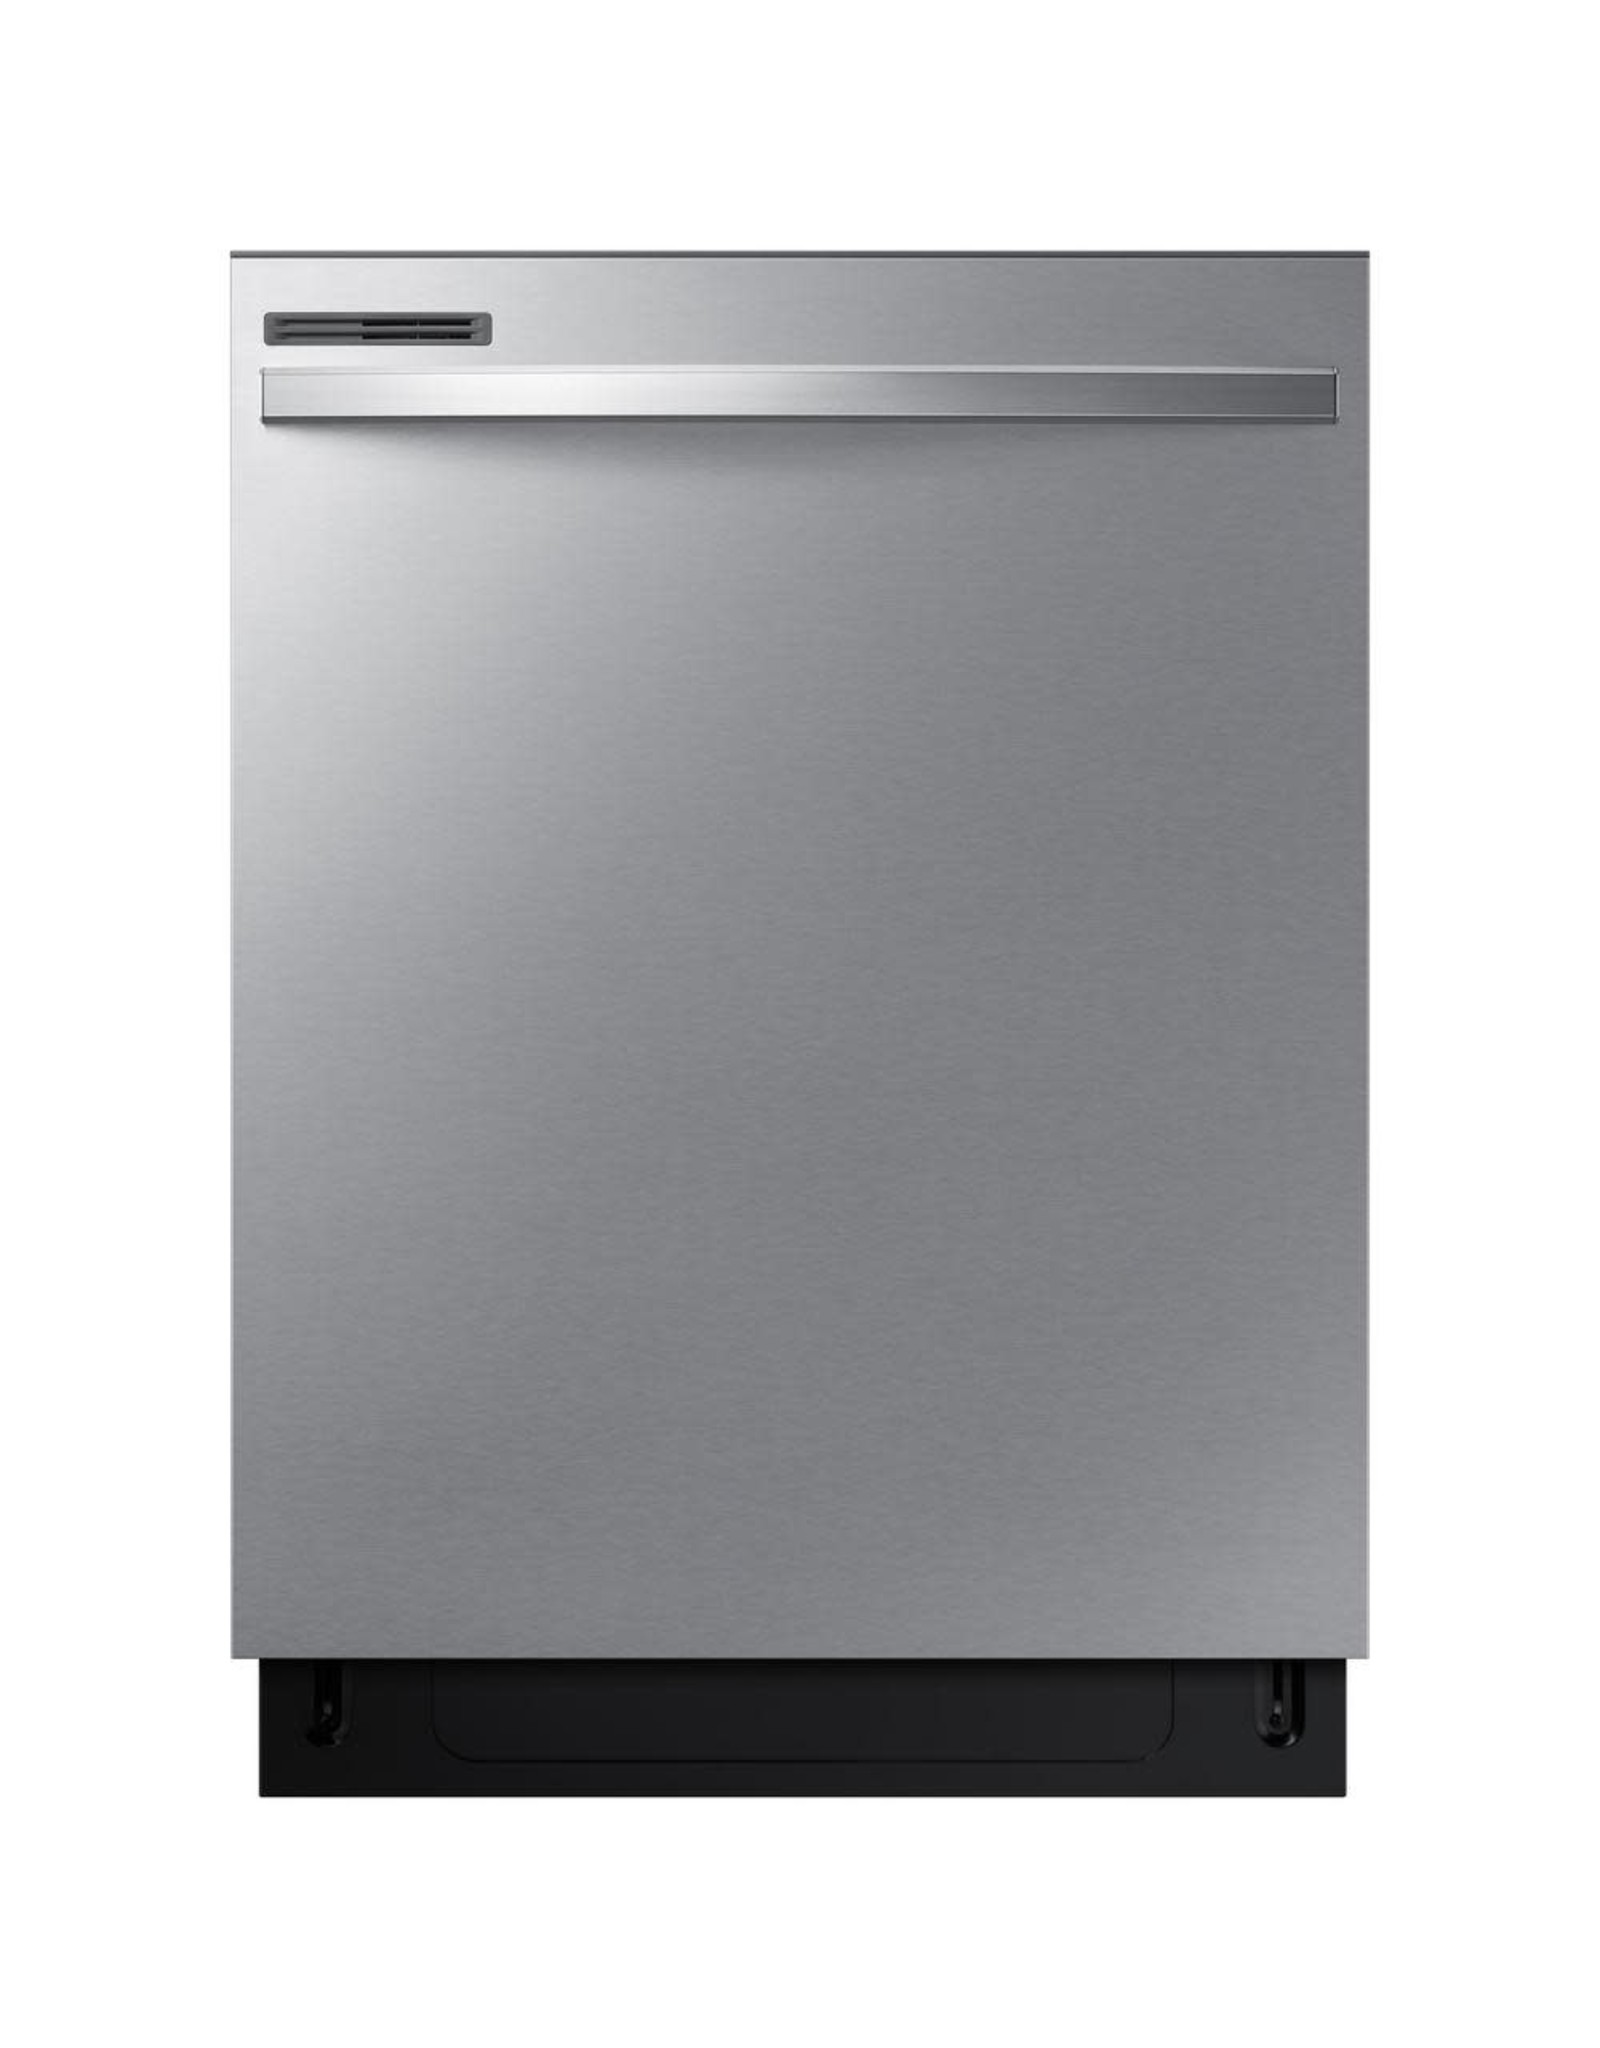 SAMSUNG DW80R2031US  Samsung 24 in. Top Control Dishwasher with Stainless Steel Interior Door and Plastic Tall Tub in Stainless Steel, 55 dBA